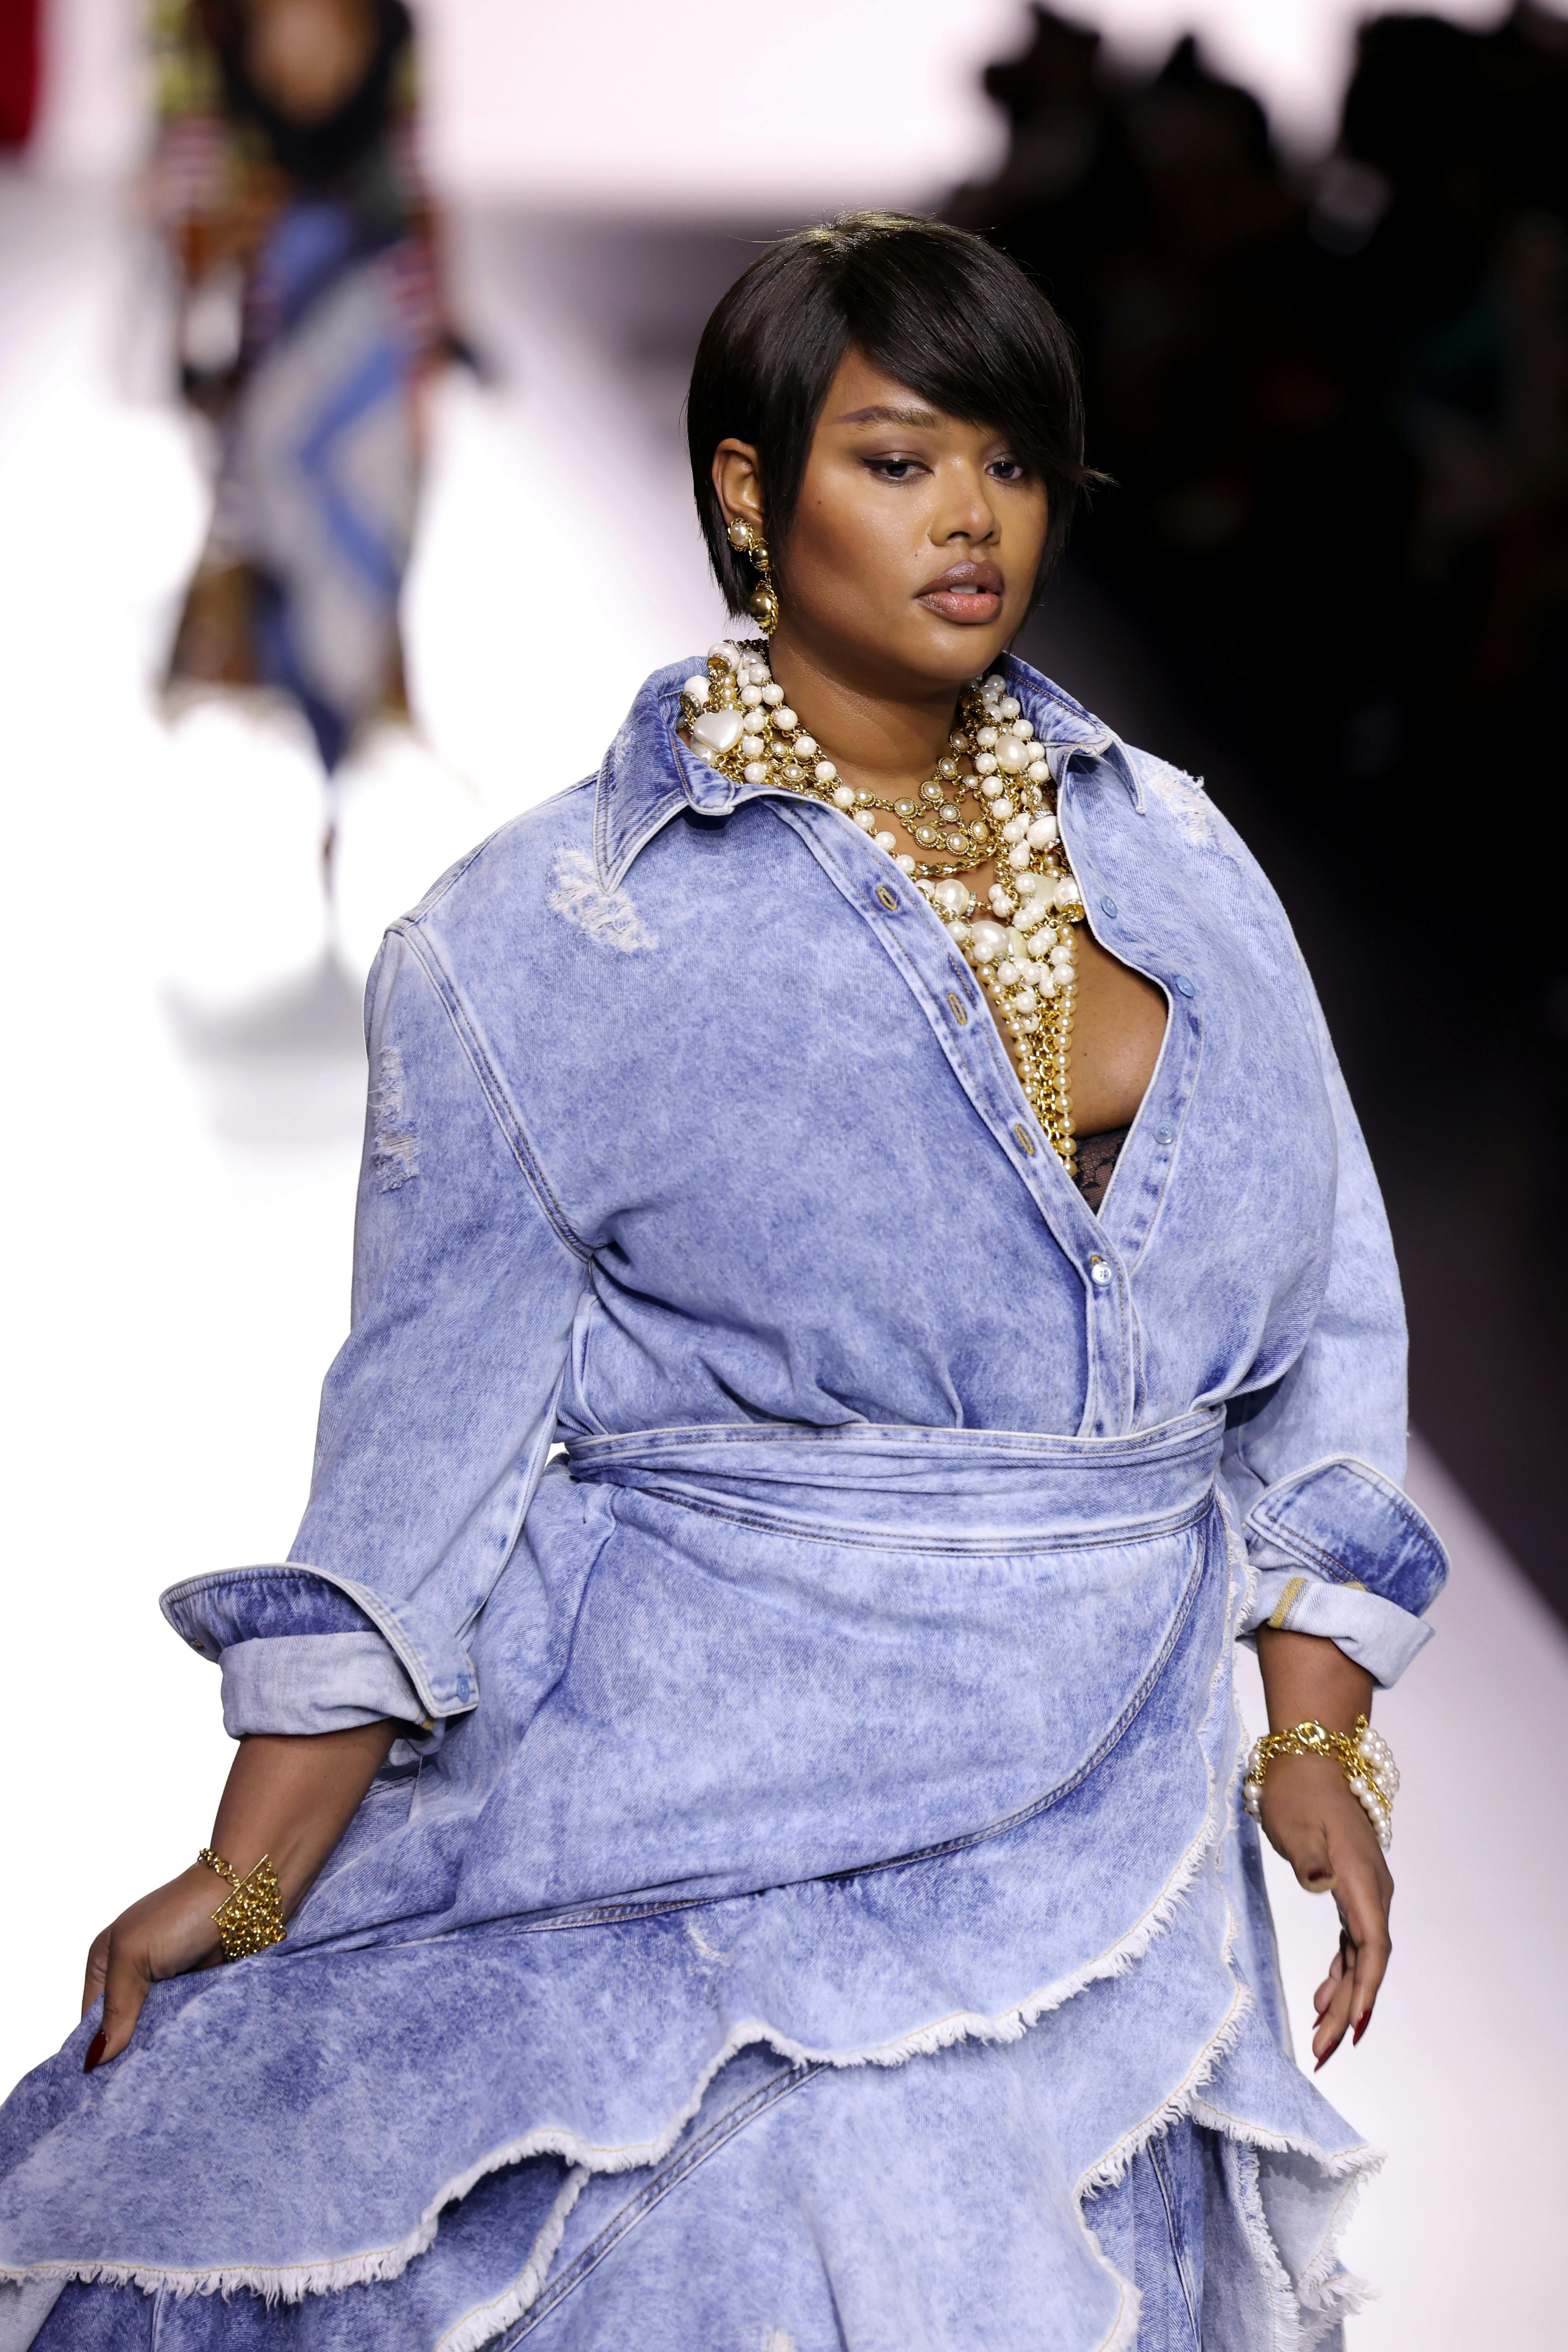 Famous plus size models breaking stereotypes in the fashion industry